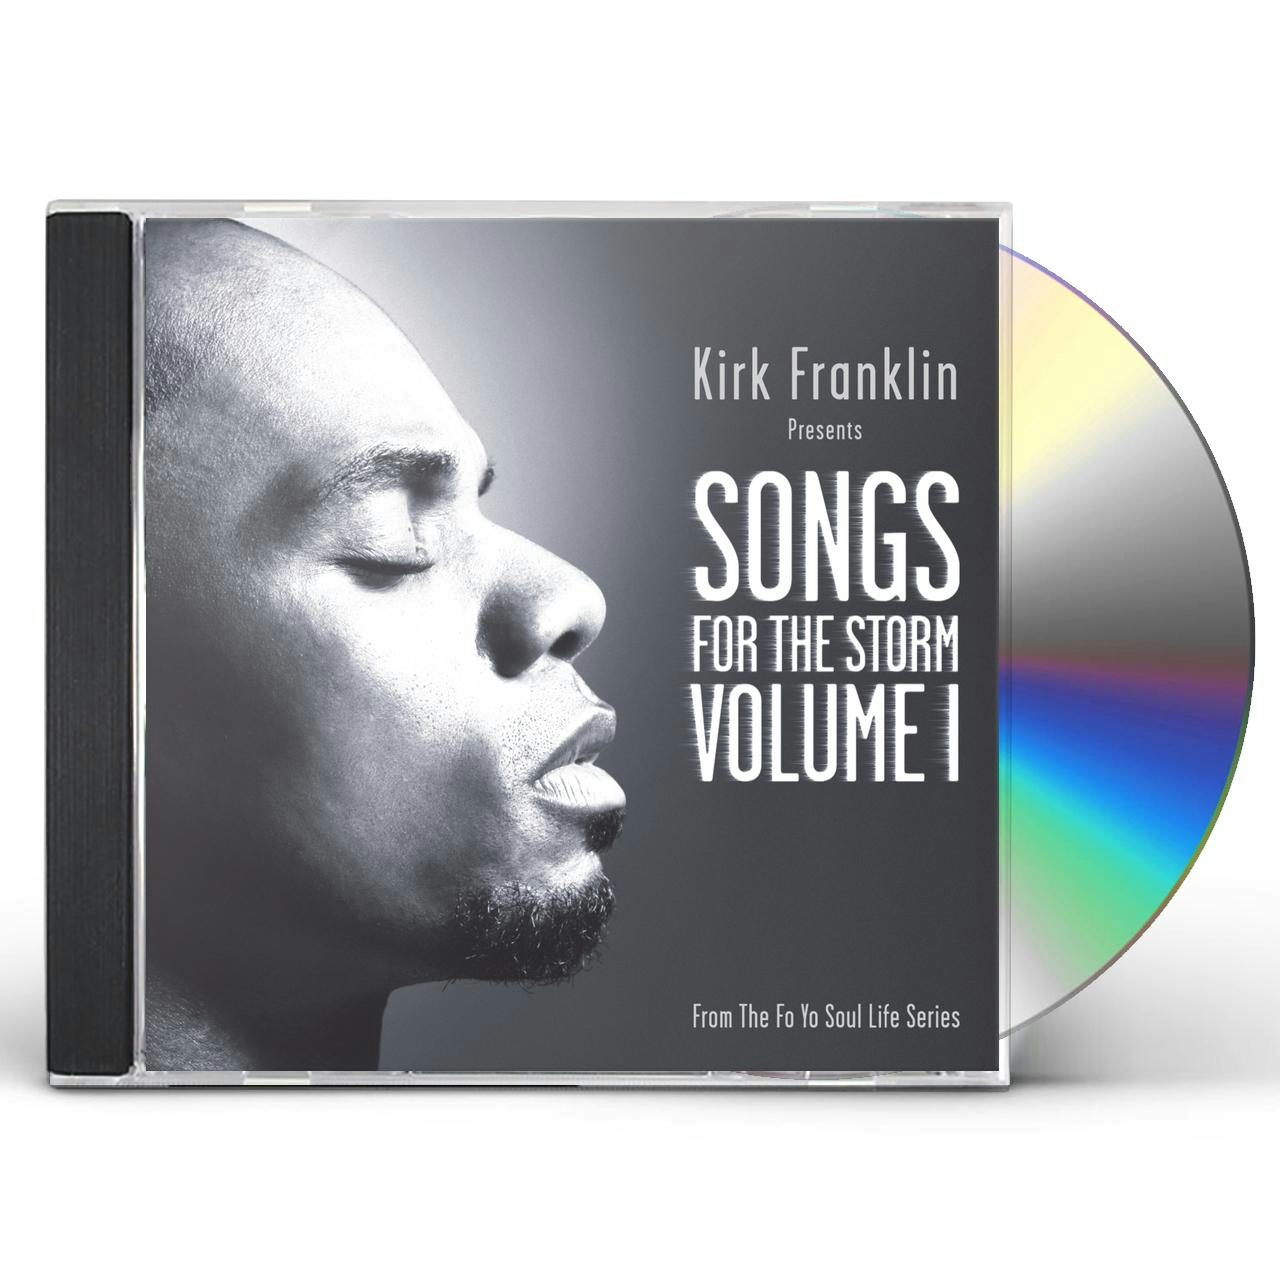 the essential kirk franklin album covers